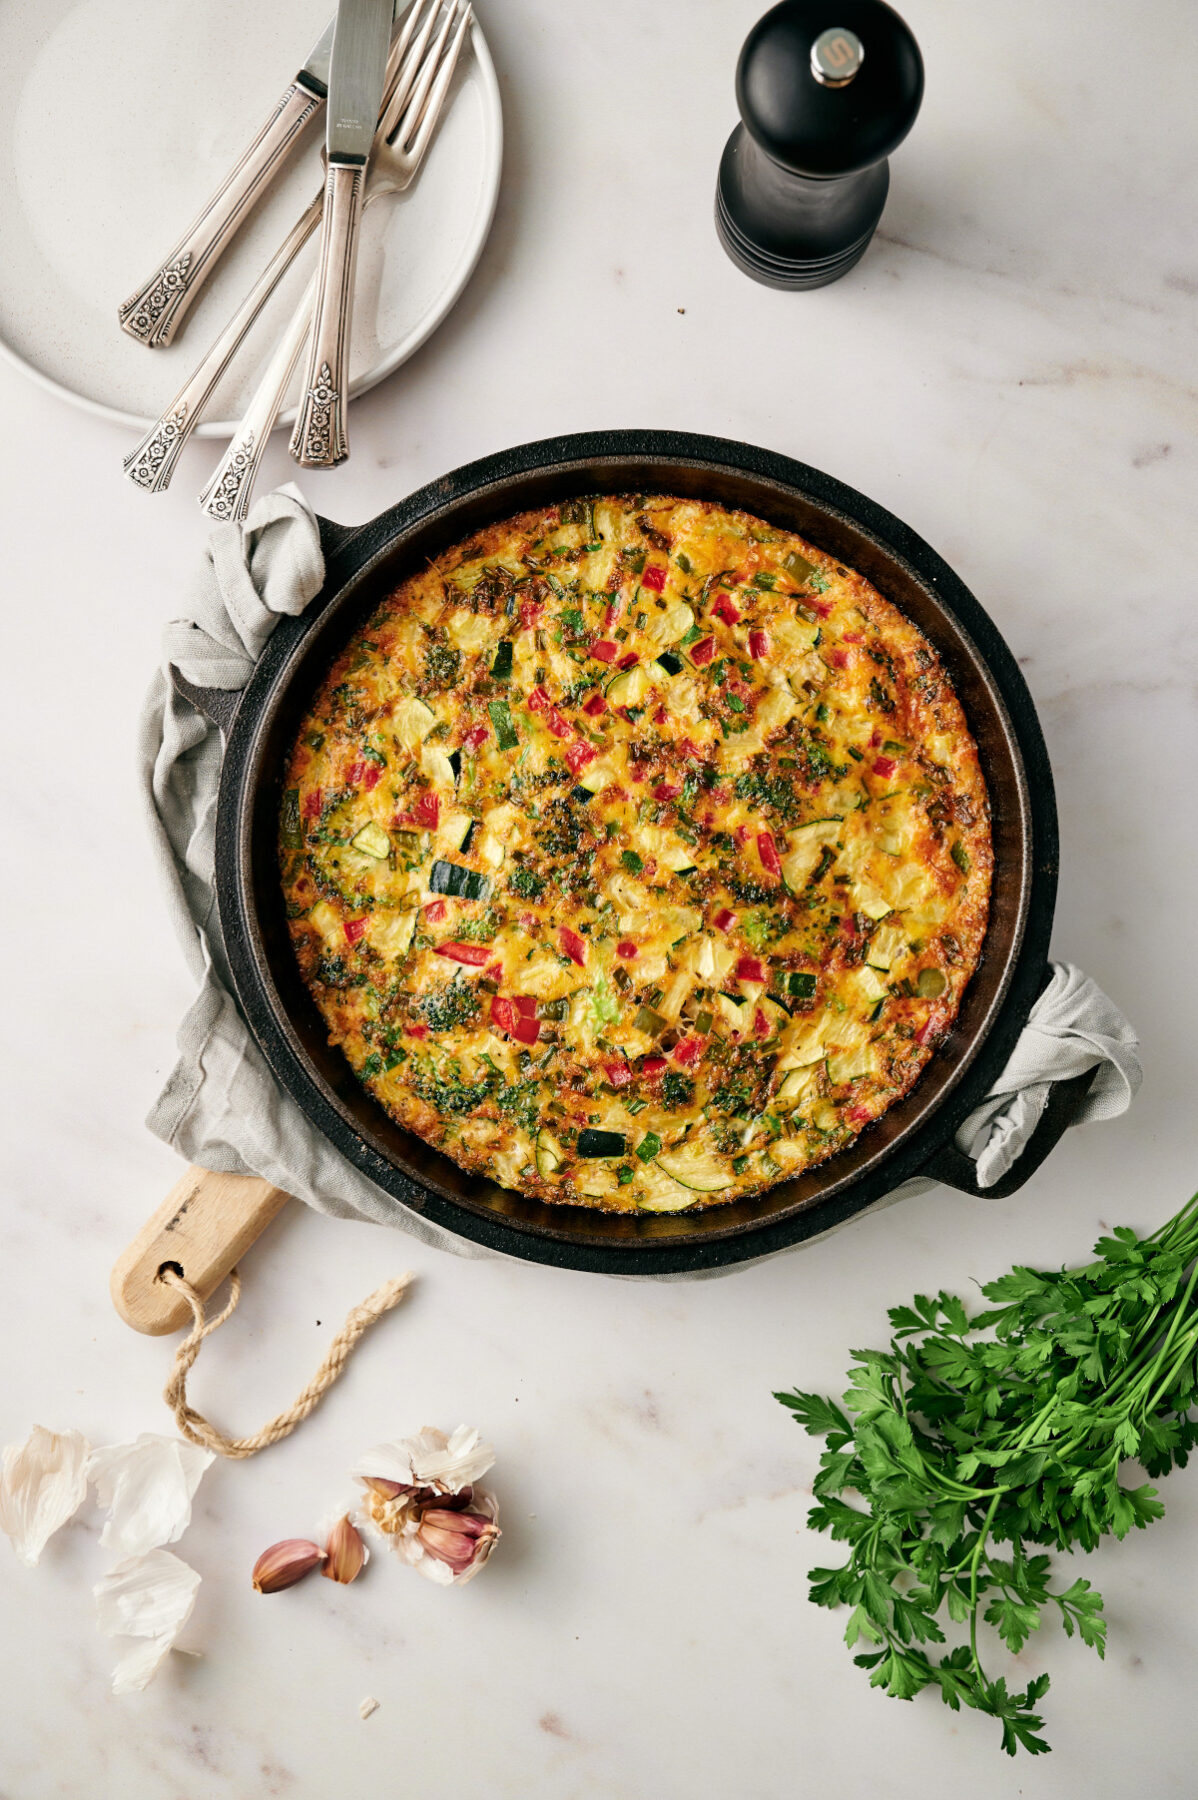 Vertical view of a fully cooked vegetable frittata in a cast iron skillet on a marble countertop with fresh herbs.